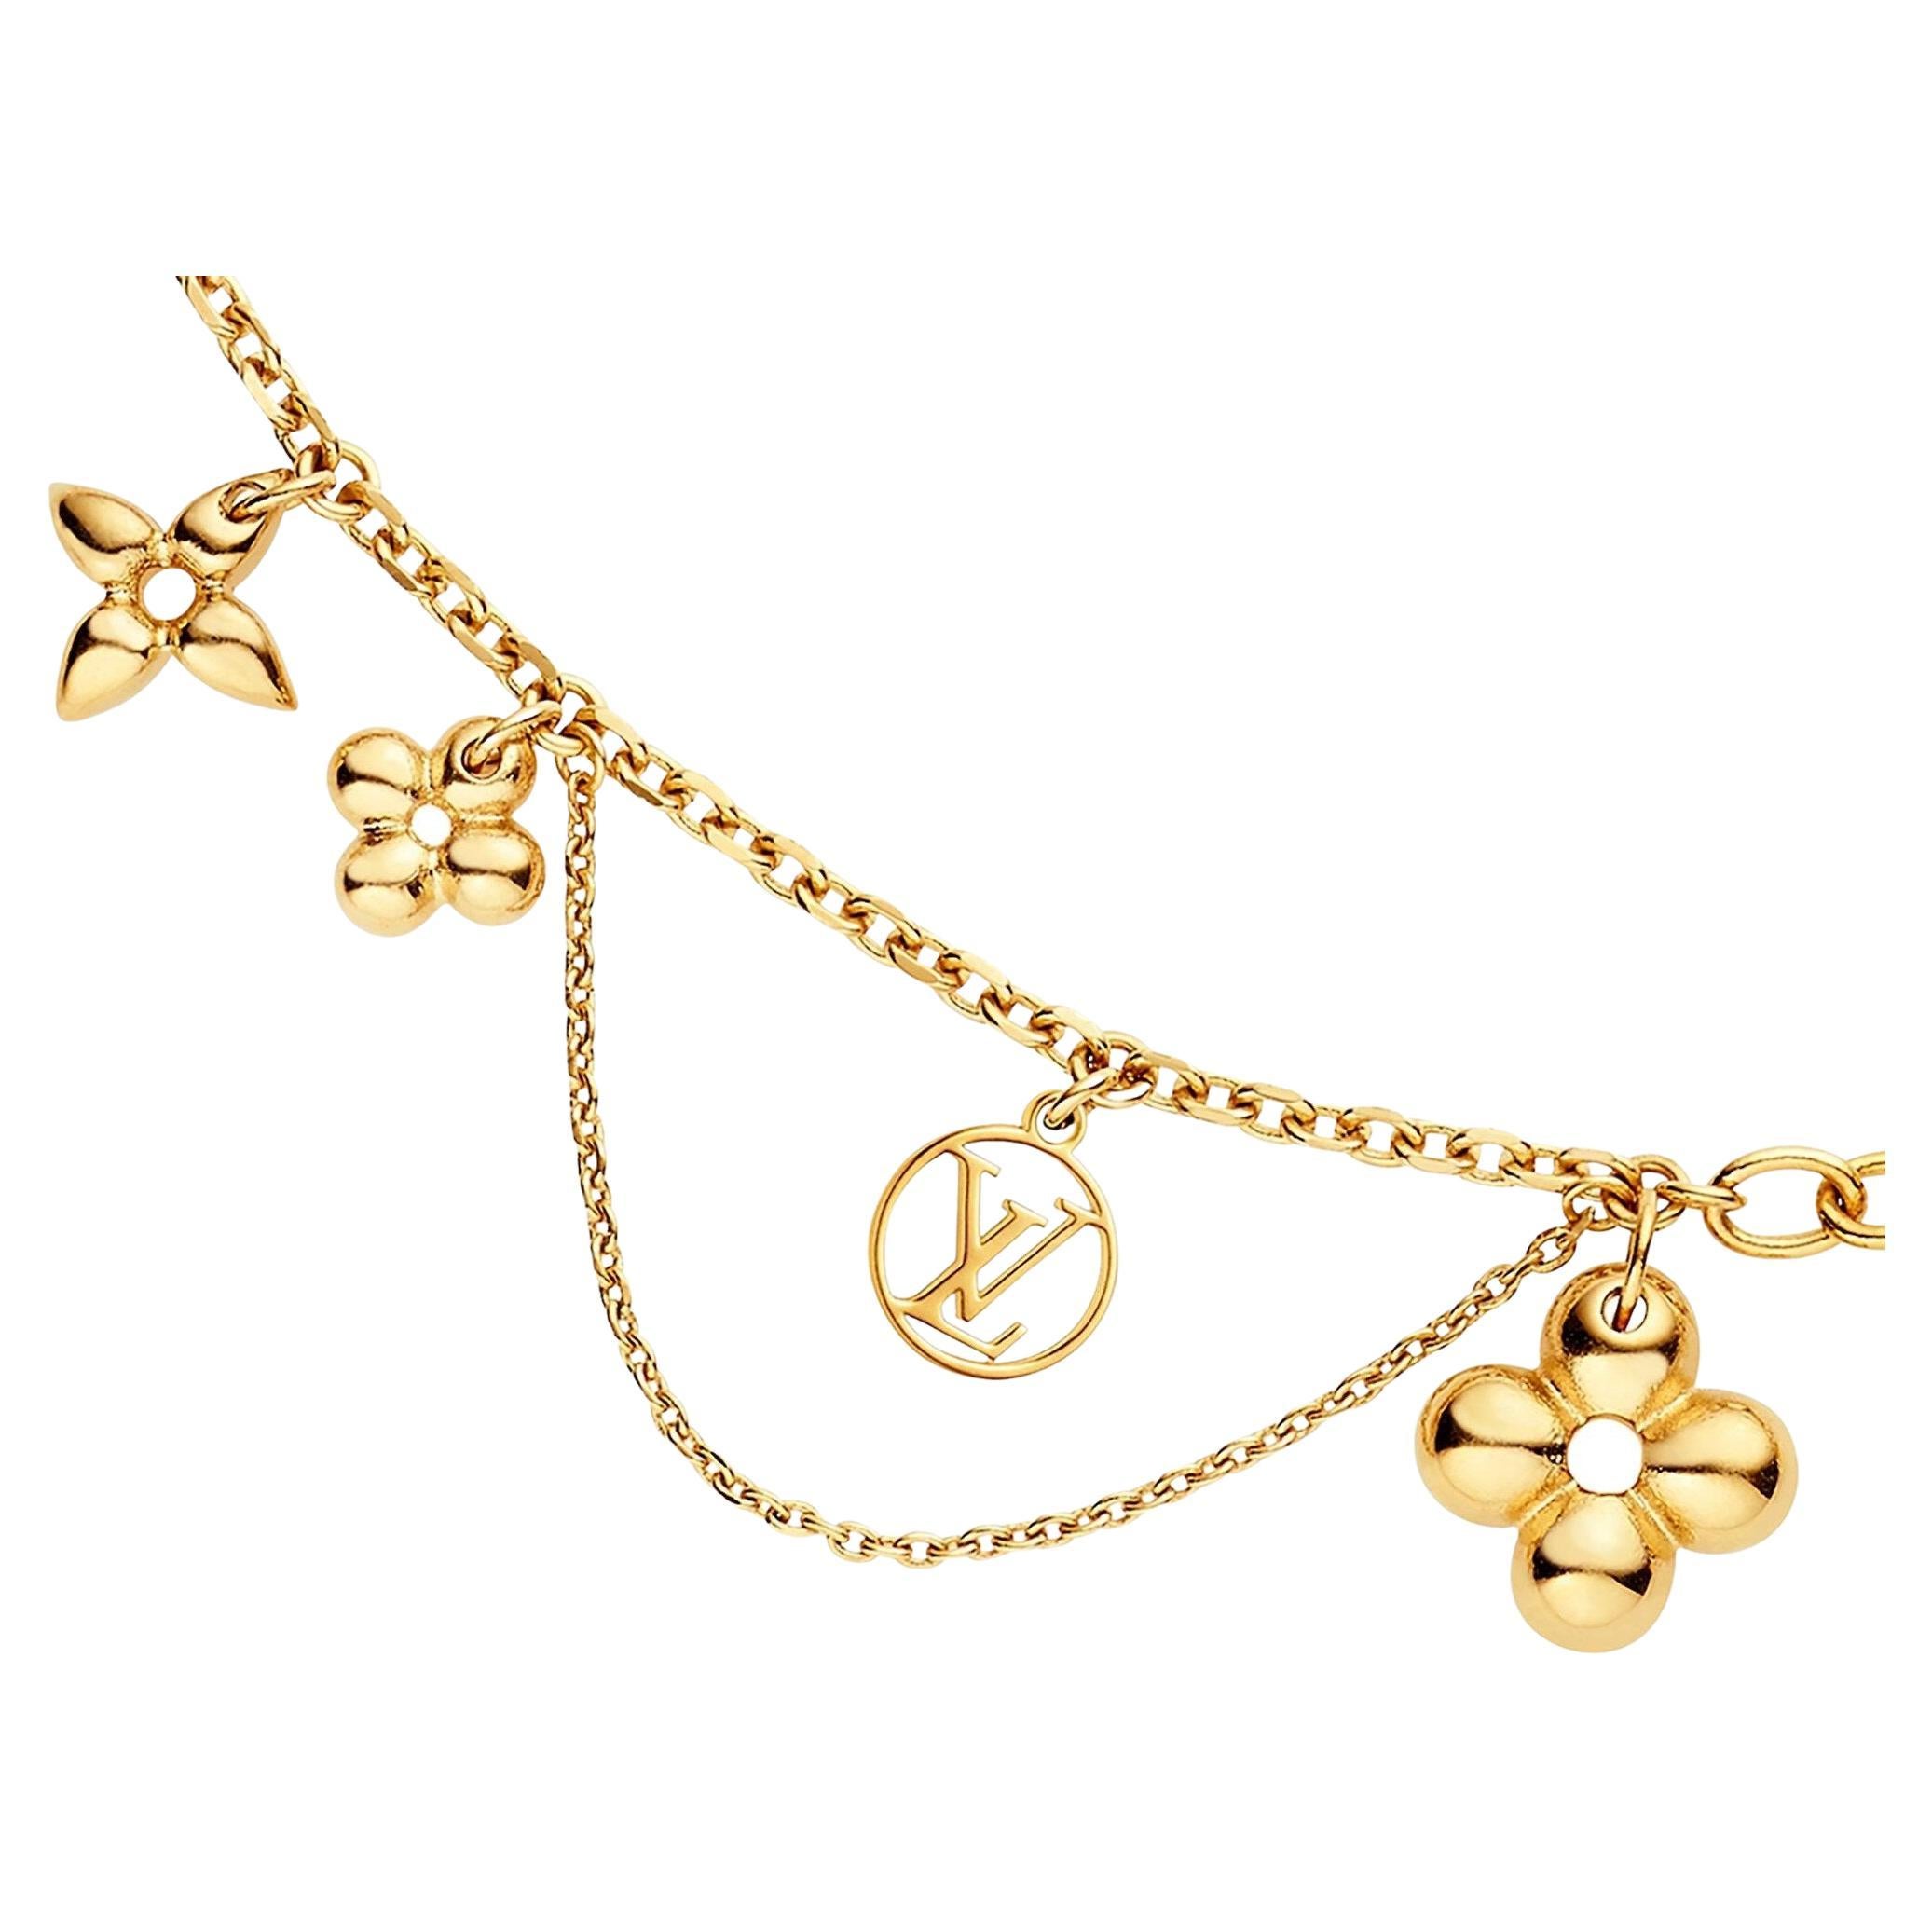 Sold at Auction: Louis Vuitton, LOUIS VUITTON Necklace BLOOMING SUPPLE.